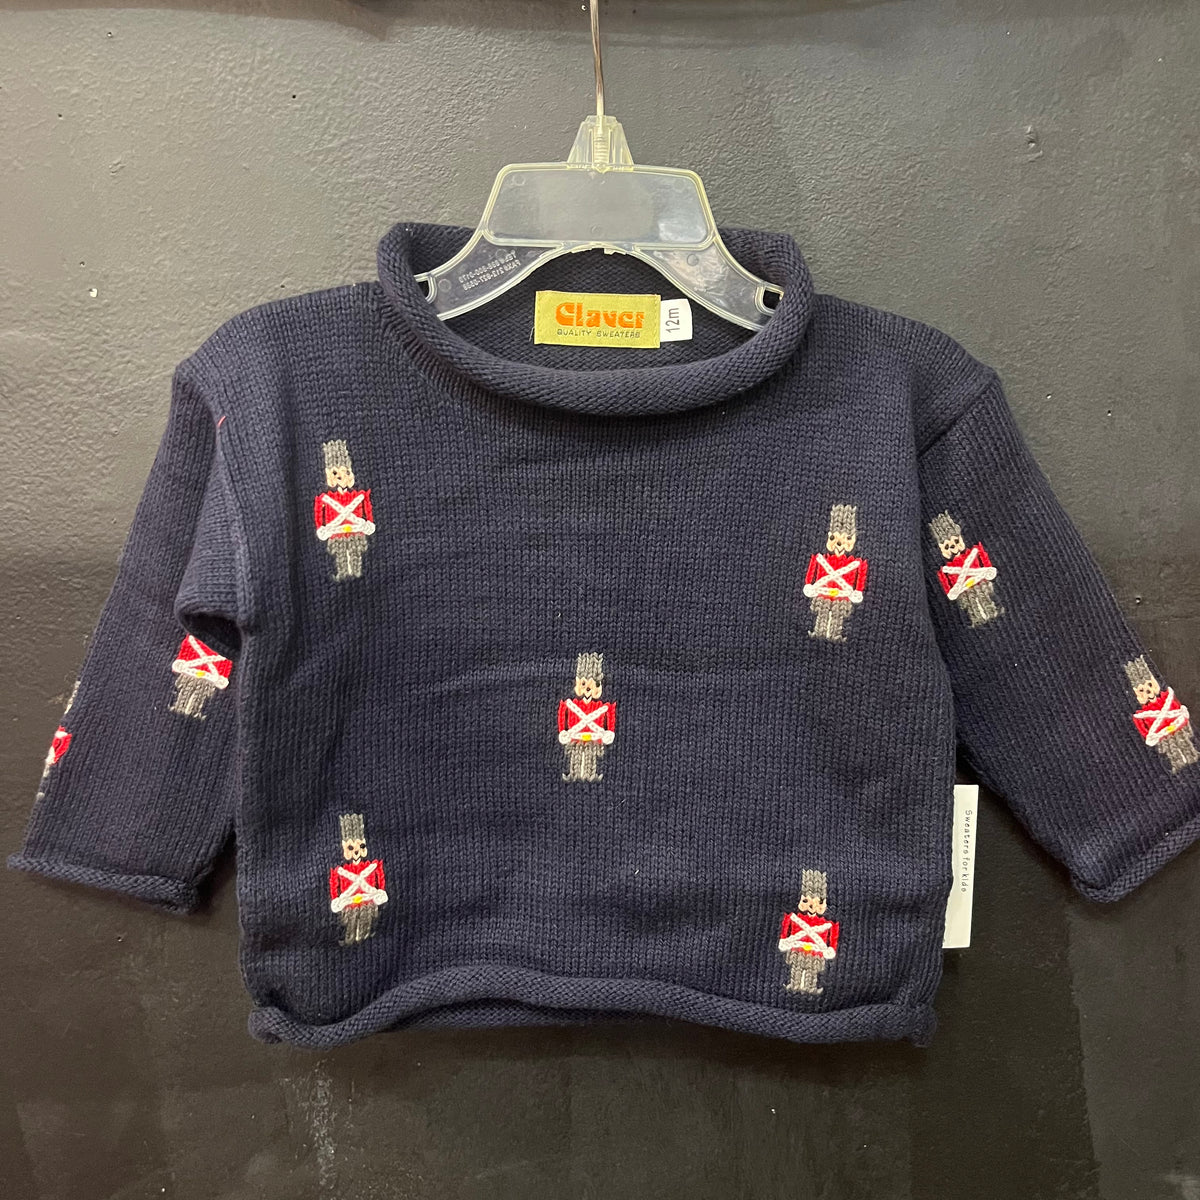 Claver Cotton Rollneck Sweater Toy Soldier Navy